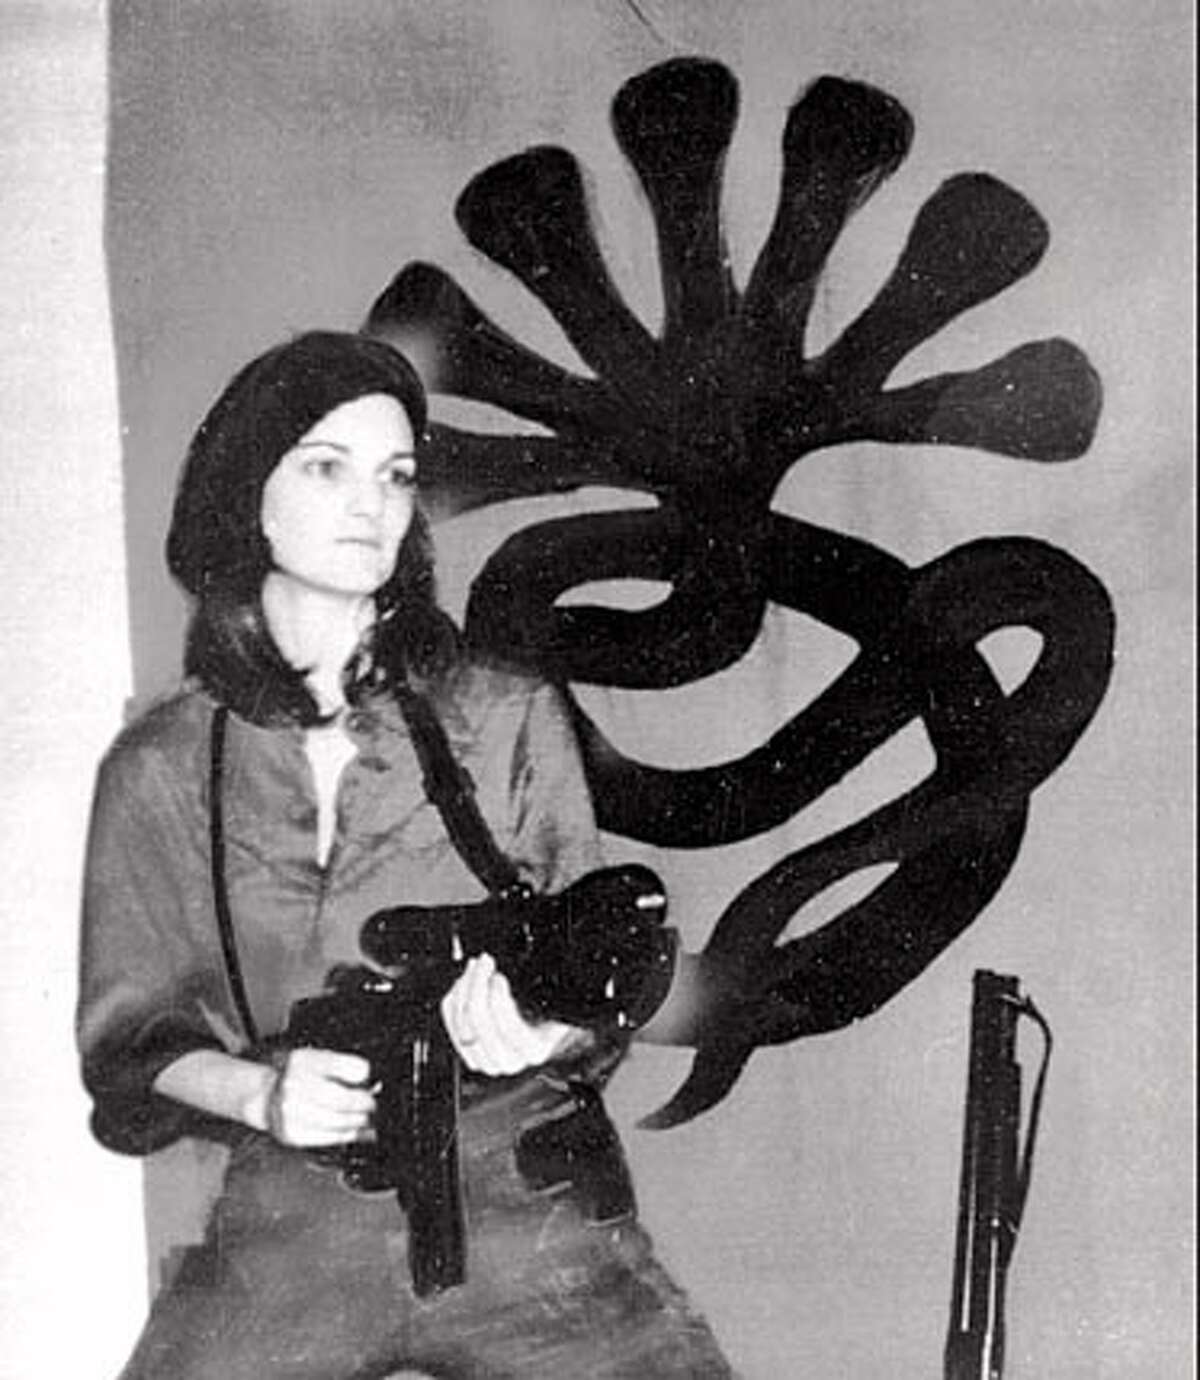 FILE--This is a photo that was received by a San Francisco radio station in April 1974 showing Patty Hearst in front of a SLA Symbionese Liberation Army insignia and holding what was described as an automatic weapon. She was calling herself TANYA as a SLA member. Friday, February 4, marks the 20th anniversary of Patty Hearst's kidnapping. (AP Photo/File) also ran: 10/07/00 CAT BookReview#BookReview#Chronicle#08-21-2005#ALL#2star#e4#0421815545